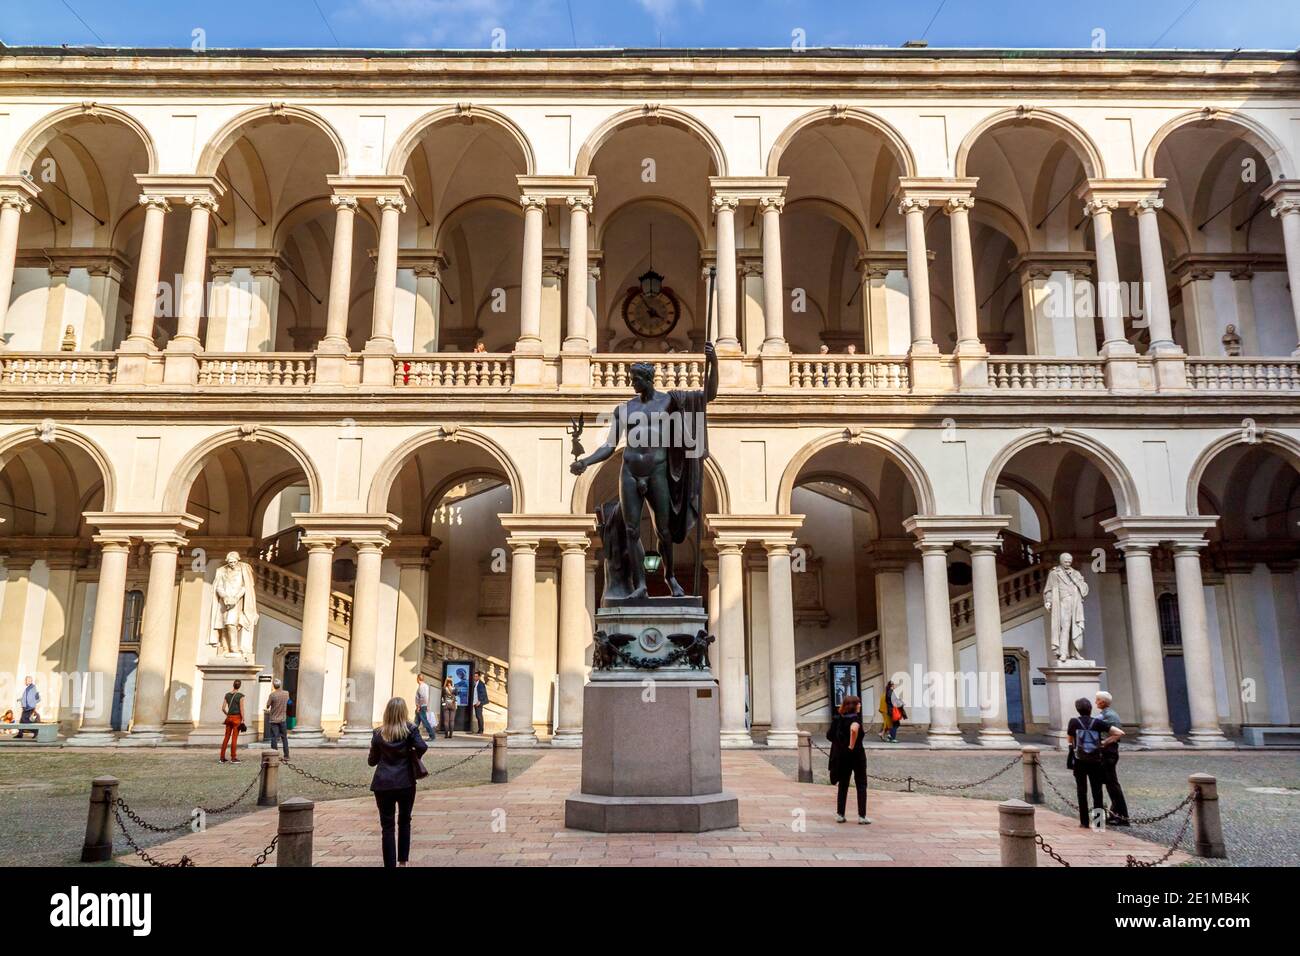 Milan, Lombardy, Italy - October 5 2017: The courtyard and entrance of the famous Brera University of Arts. Stock Photo